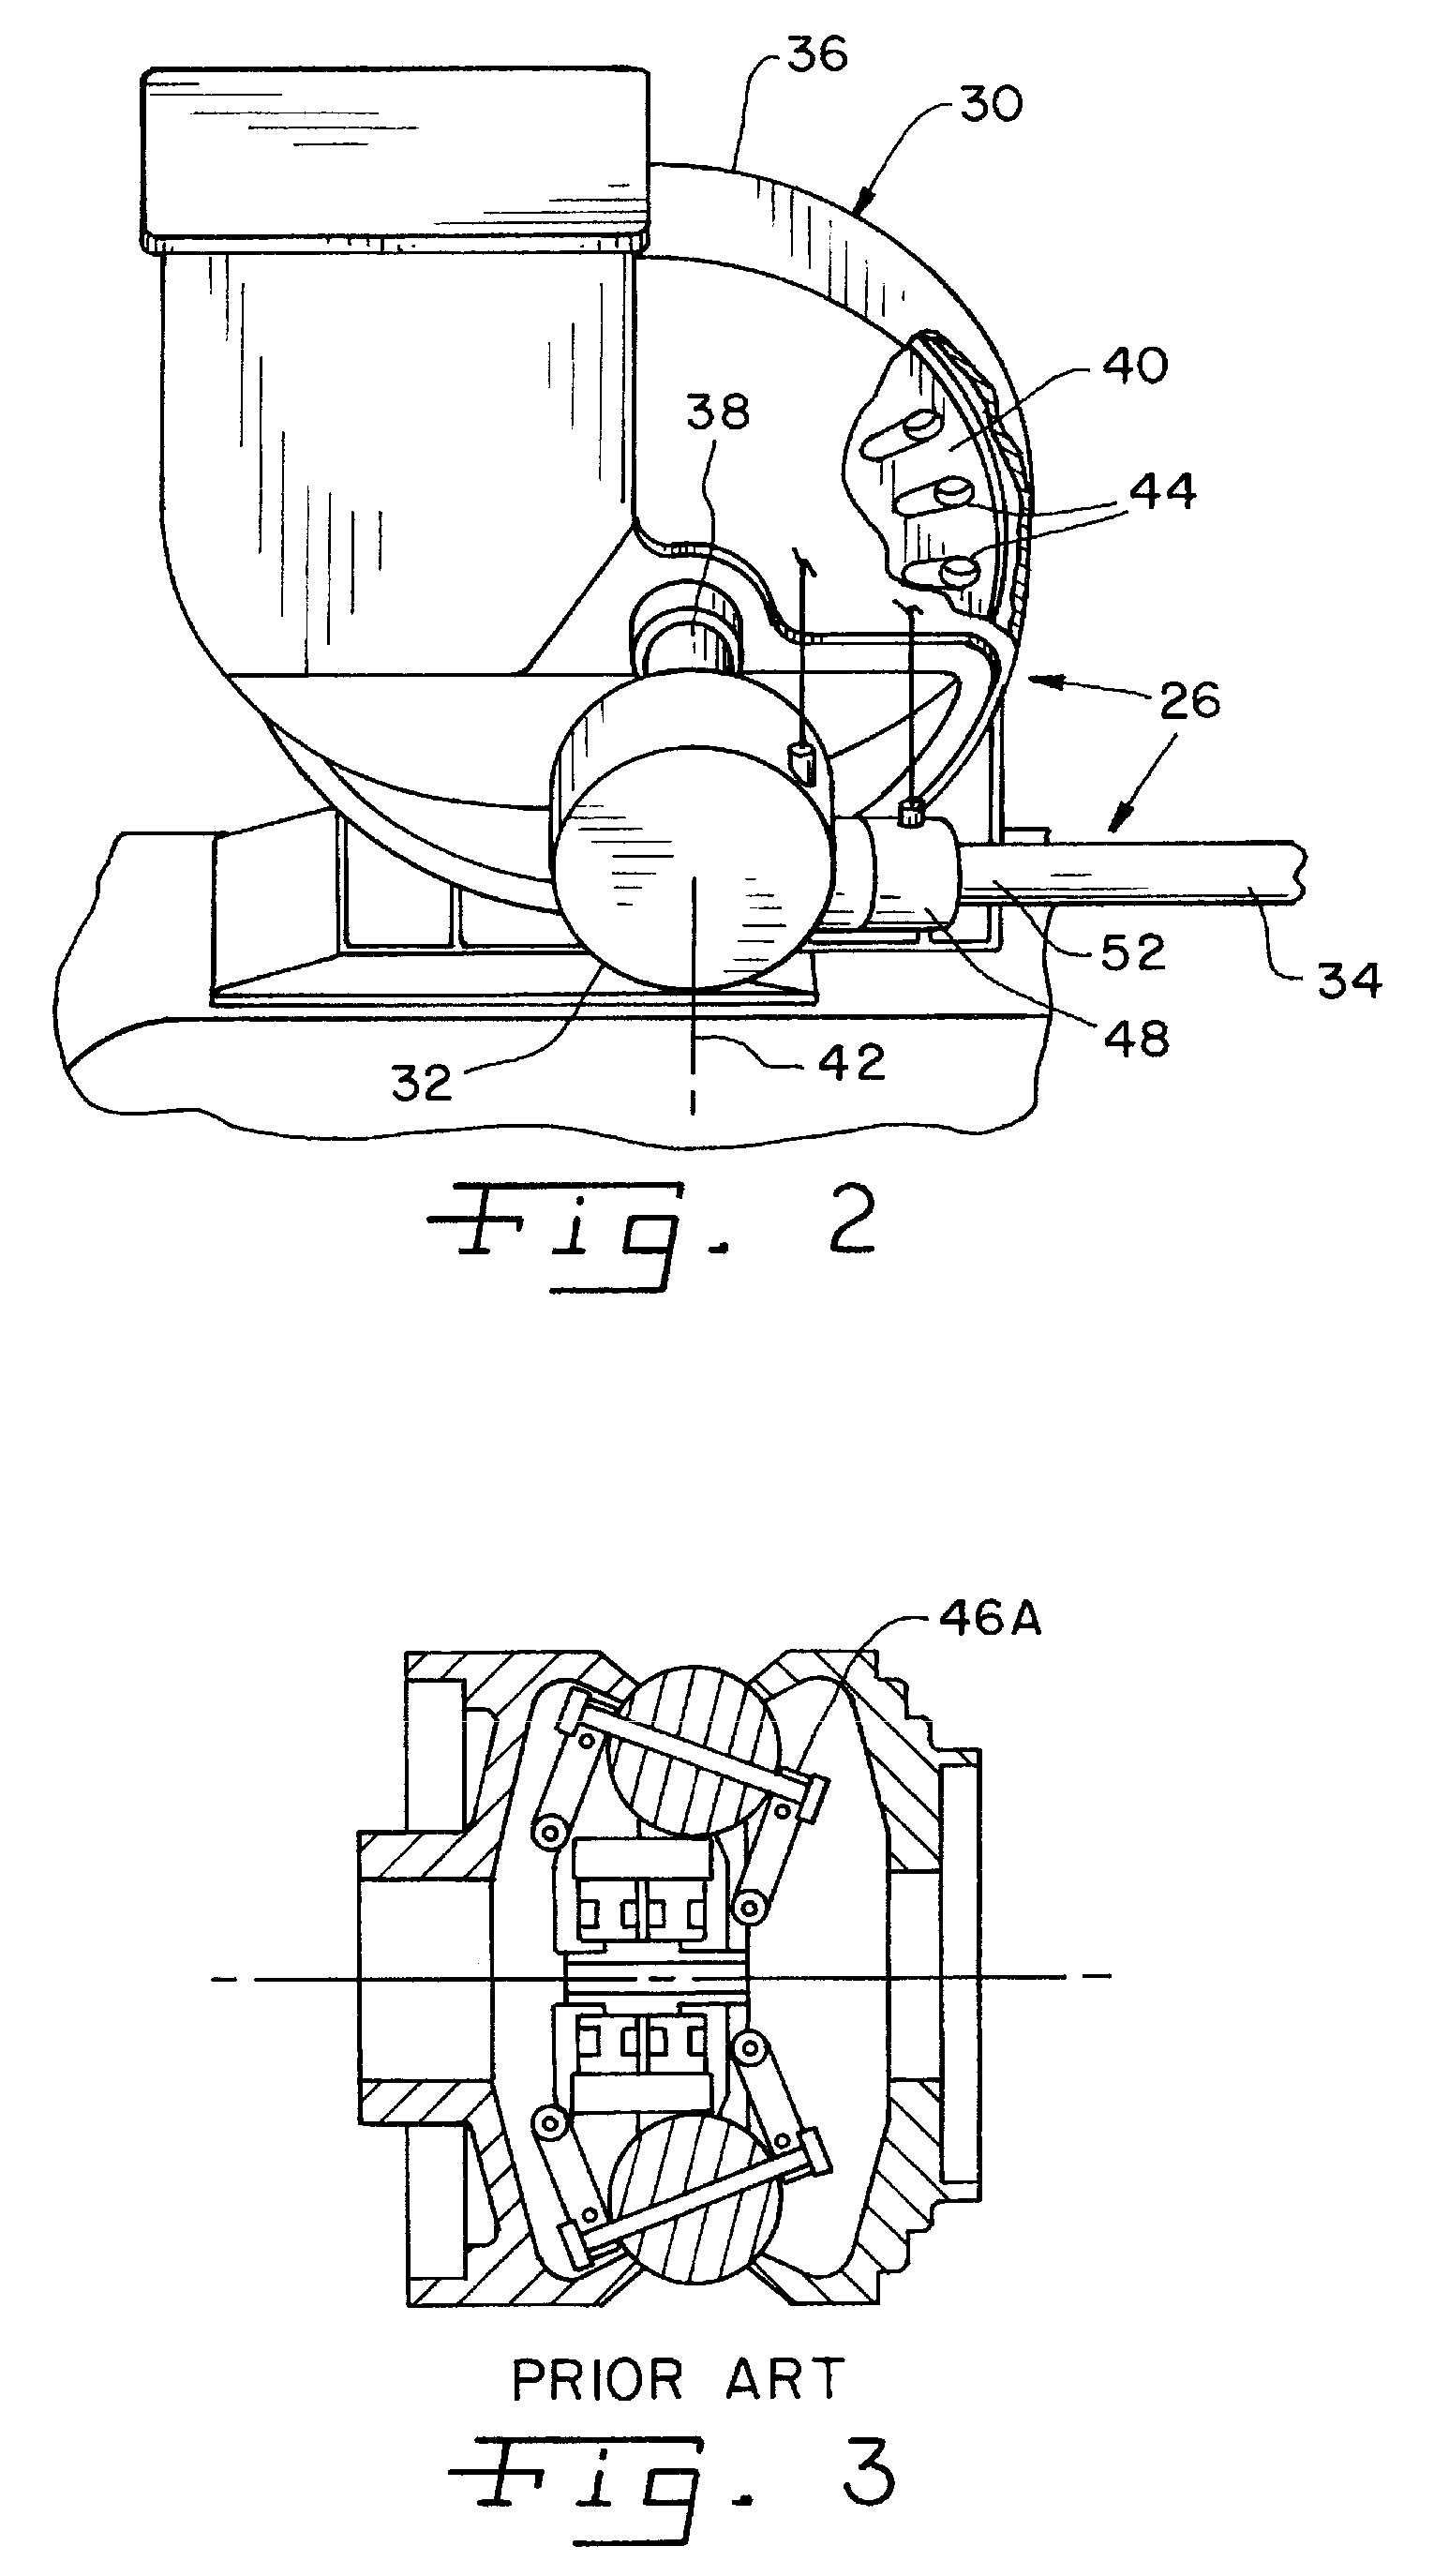 Ground driven seed metering system with a continuously variable transmission